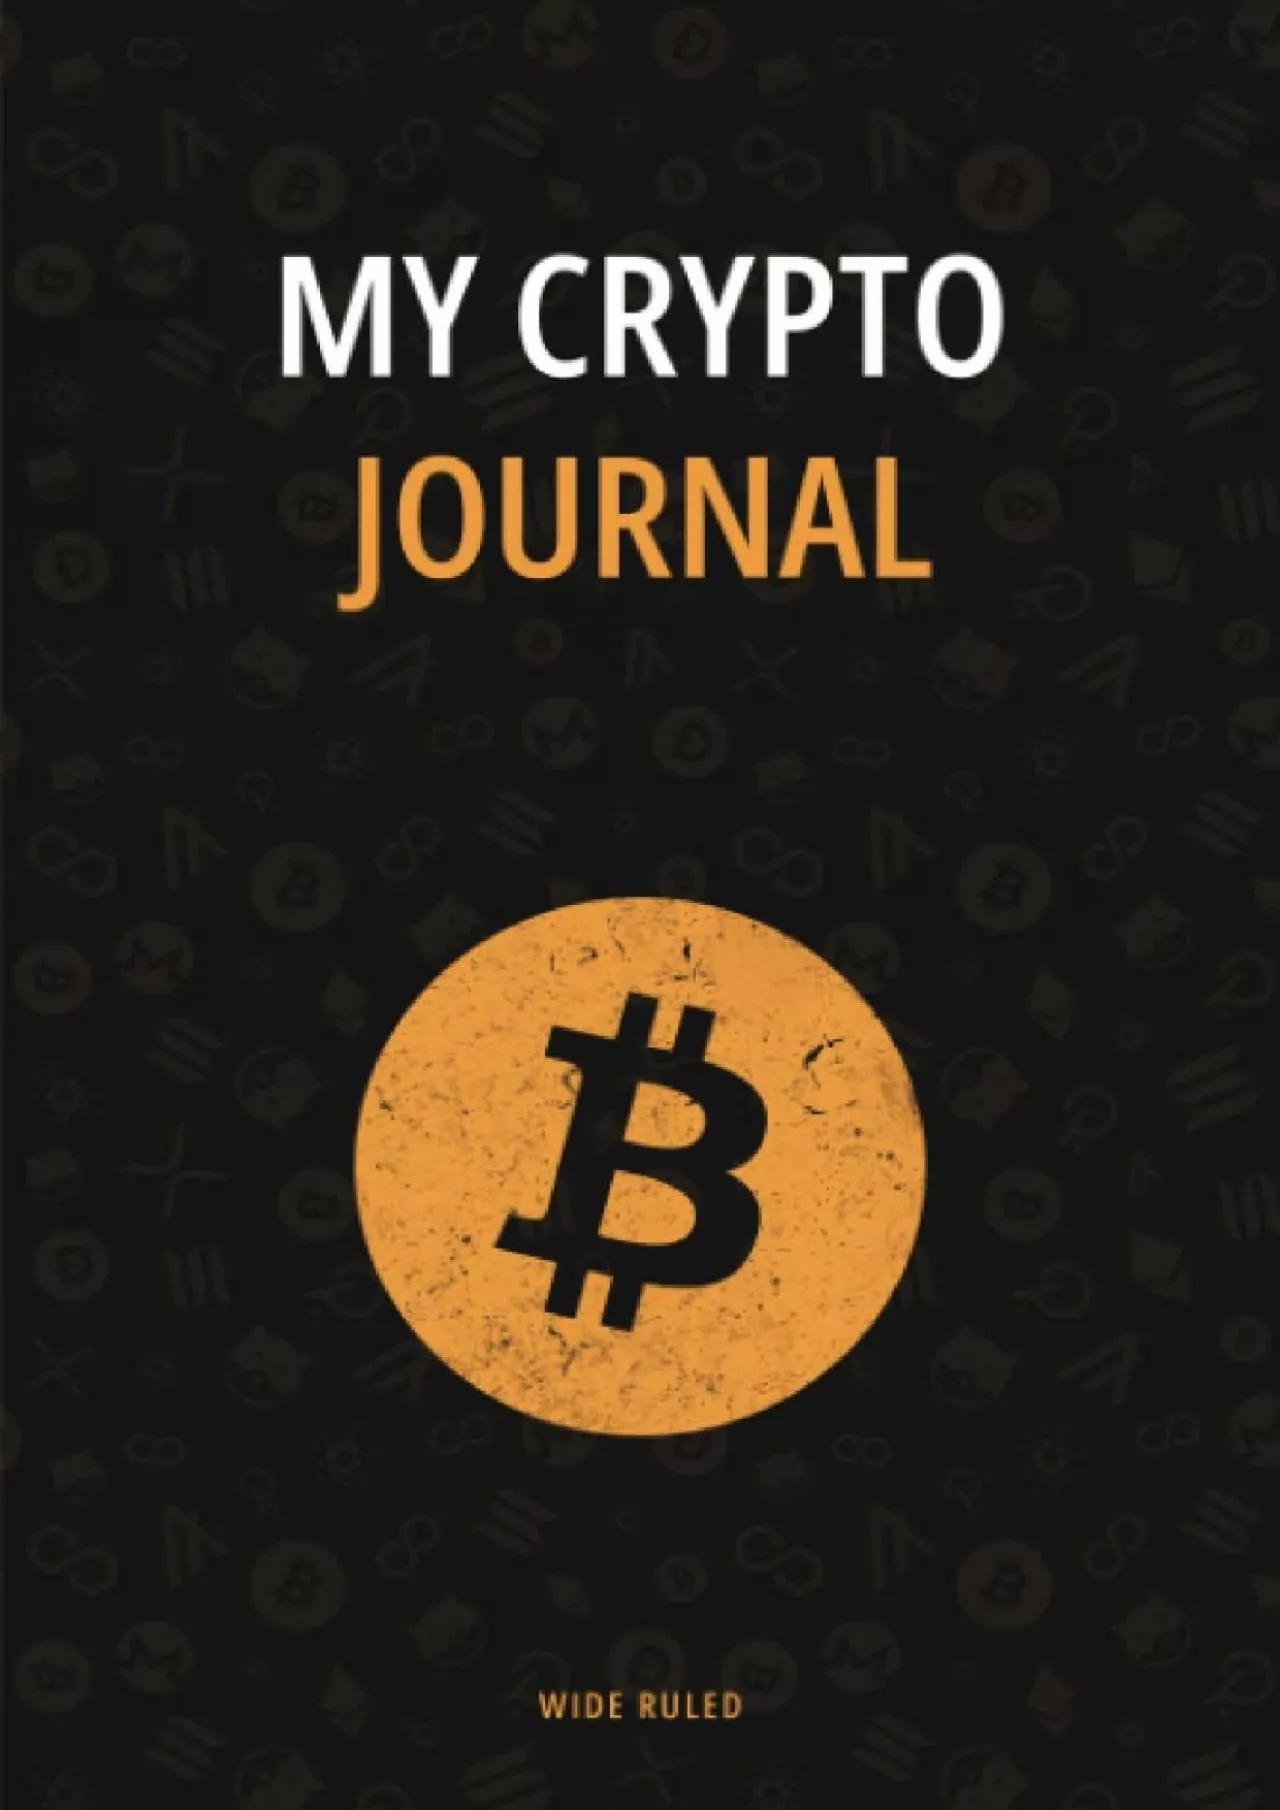 (BOOS)-My Crypto Journal: Lined Notebook, Bitcoin Edition includes Backup Seed Phrase